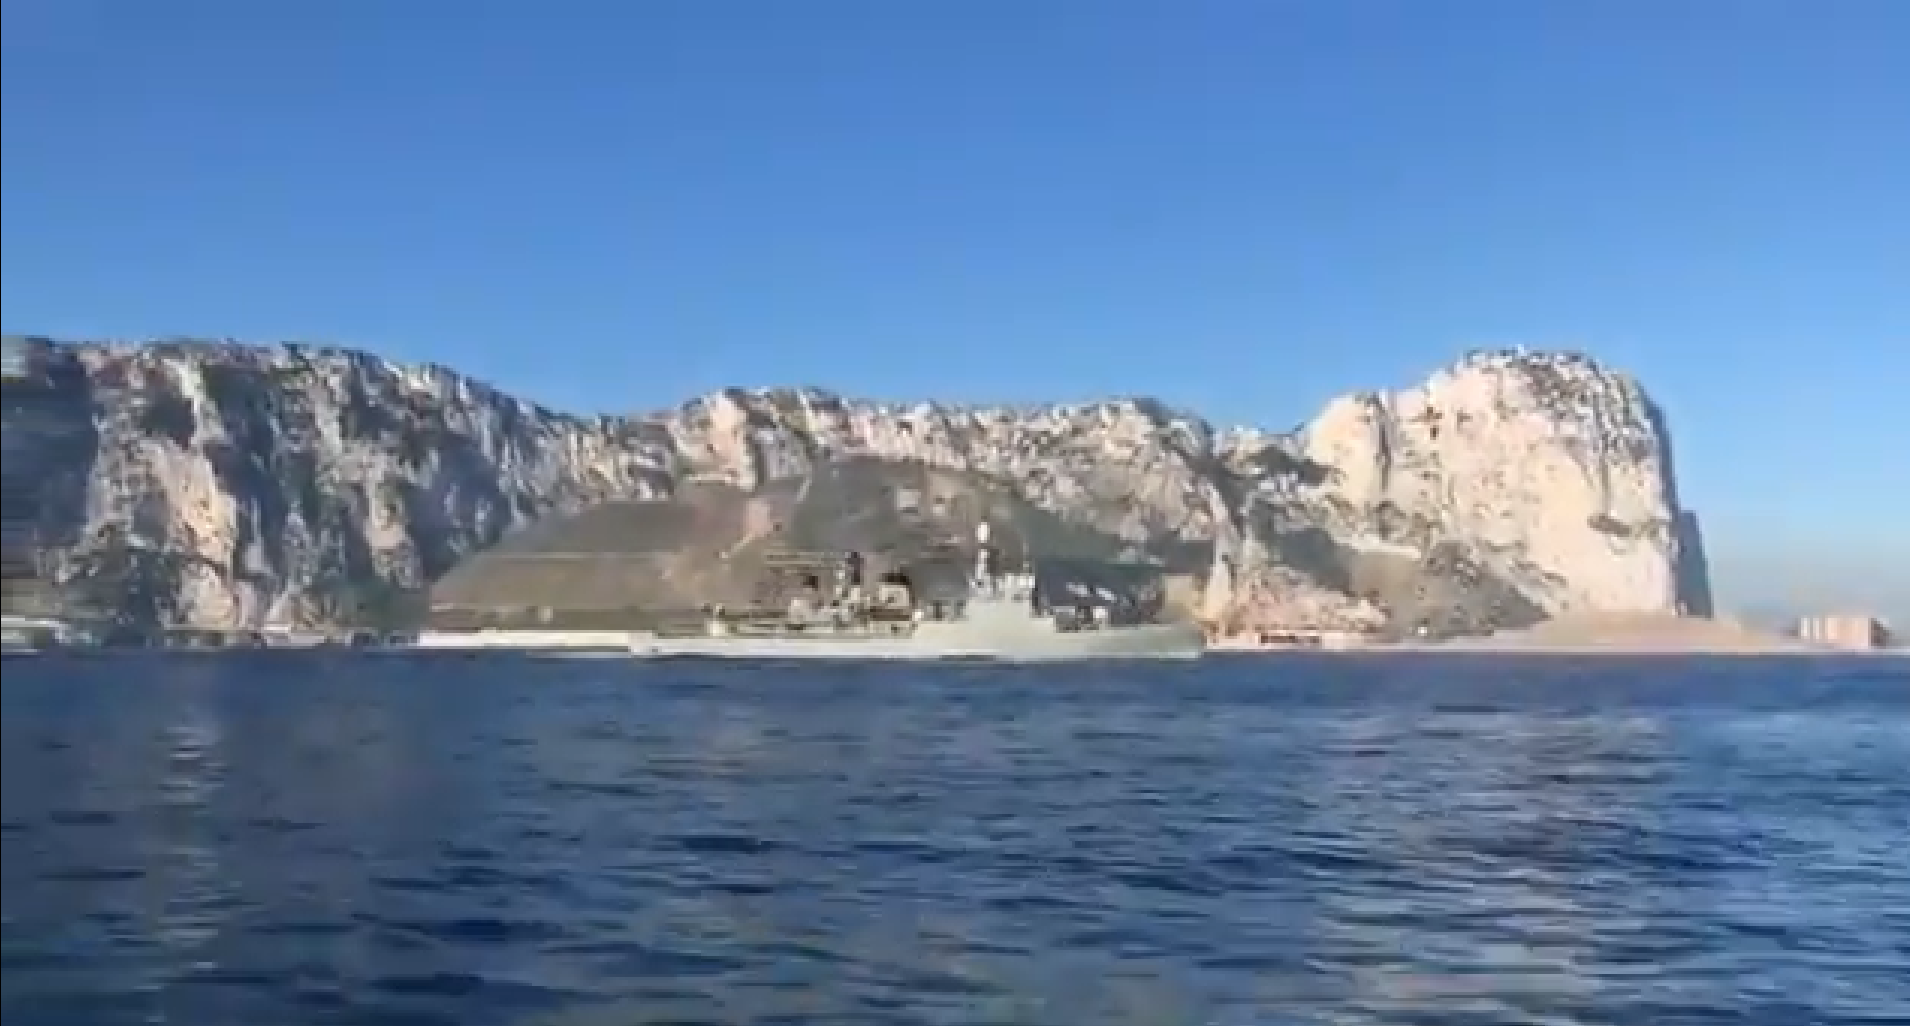 Video: Spanish navy ship in Gibraltar waters, apparently playing Spanish anthem